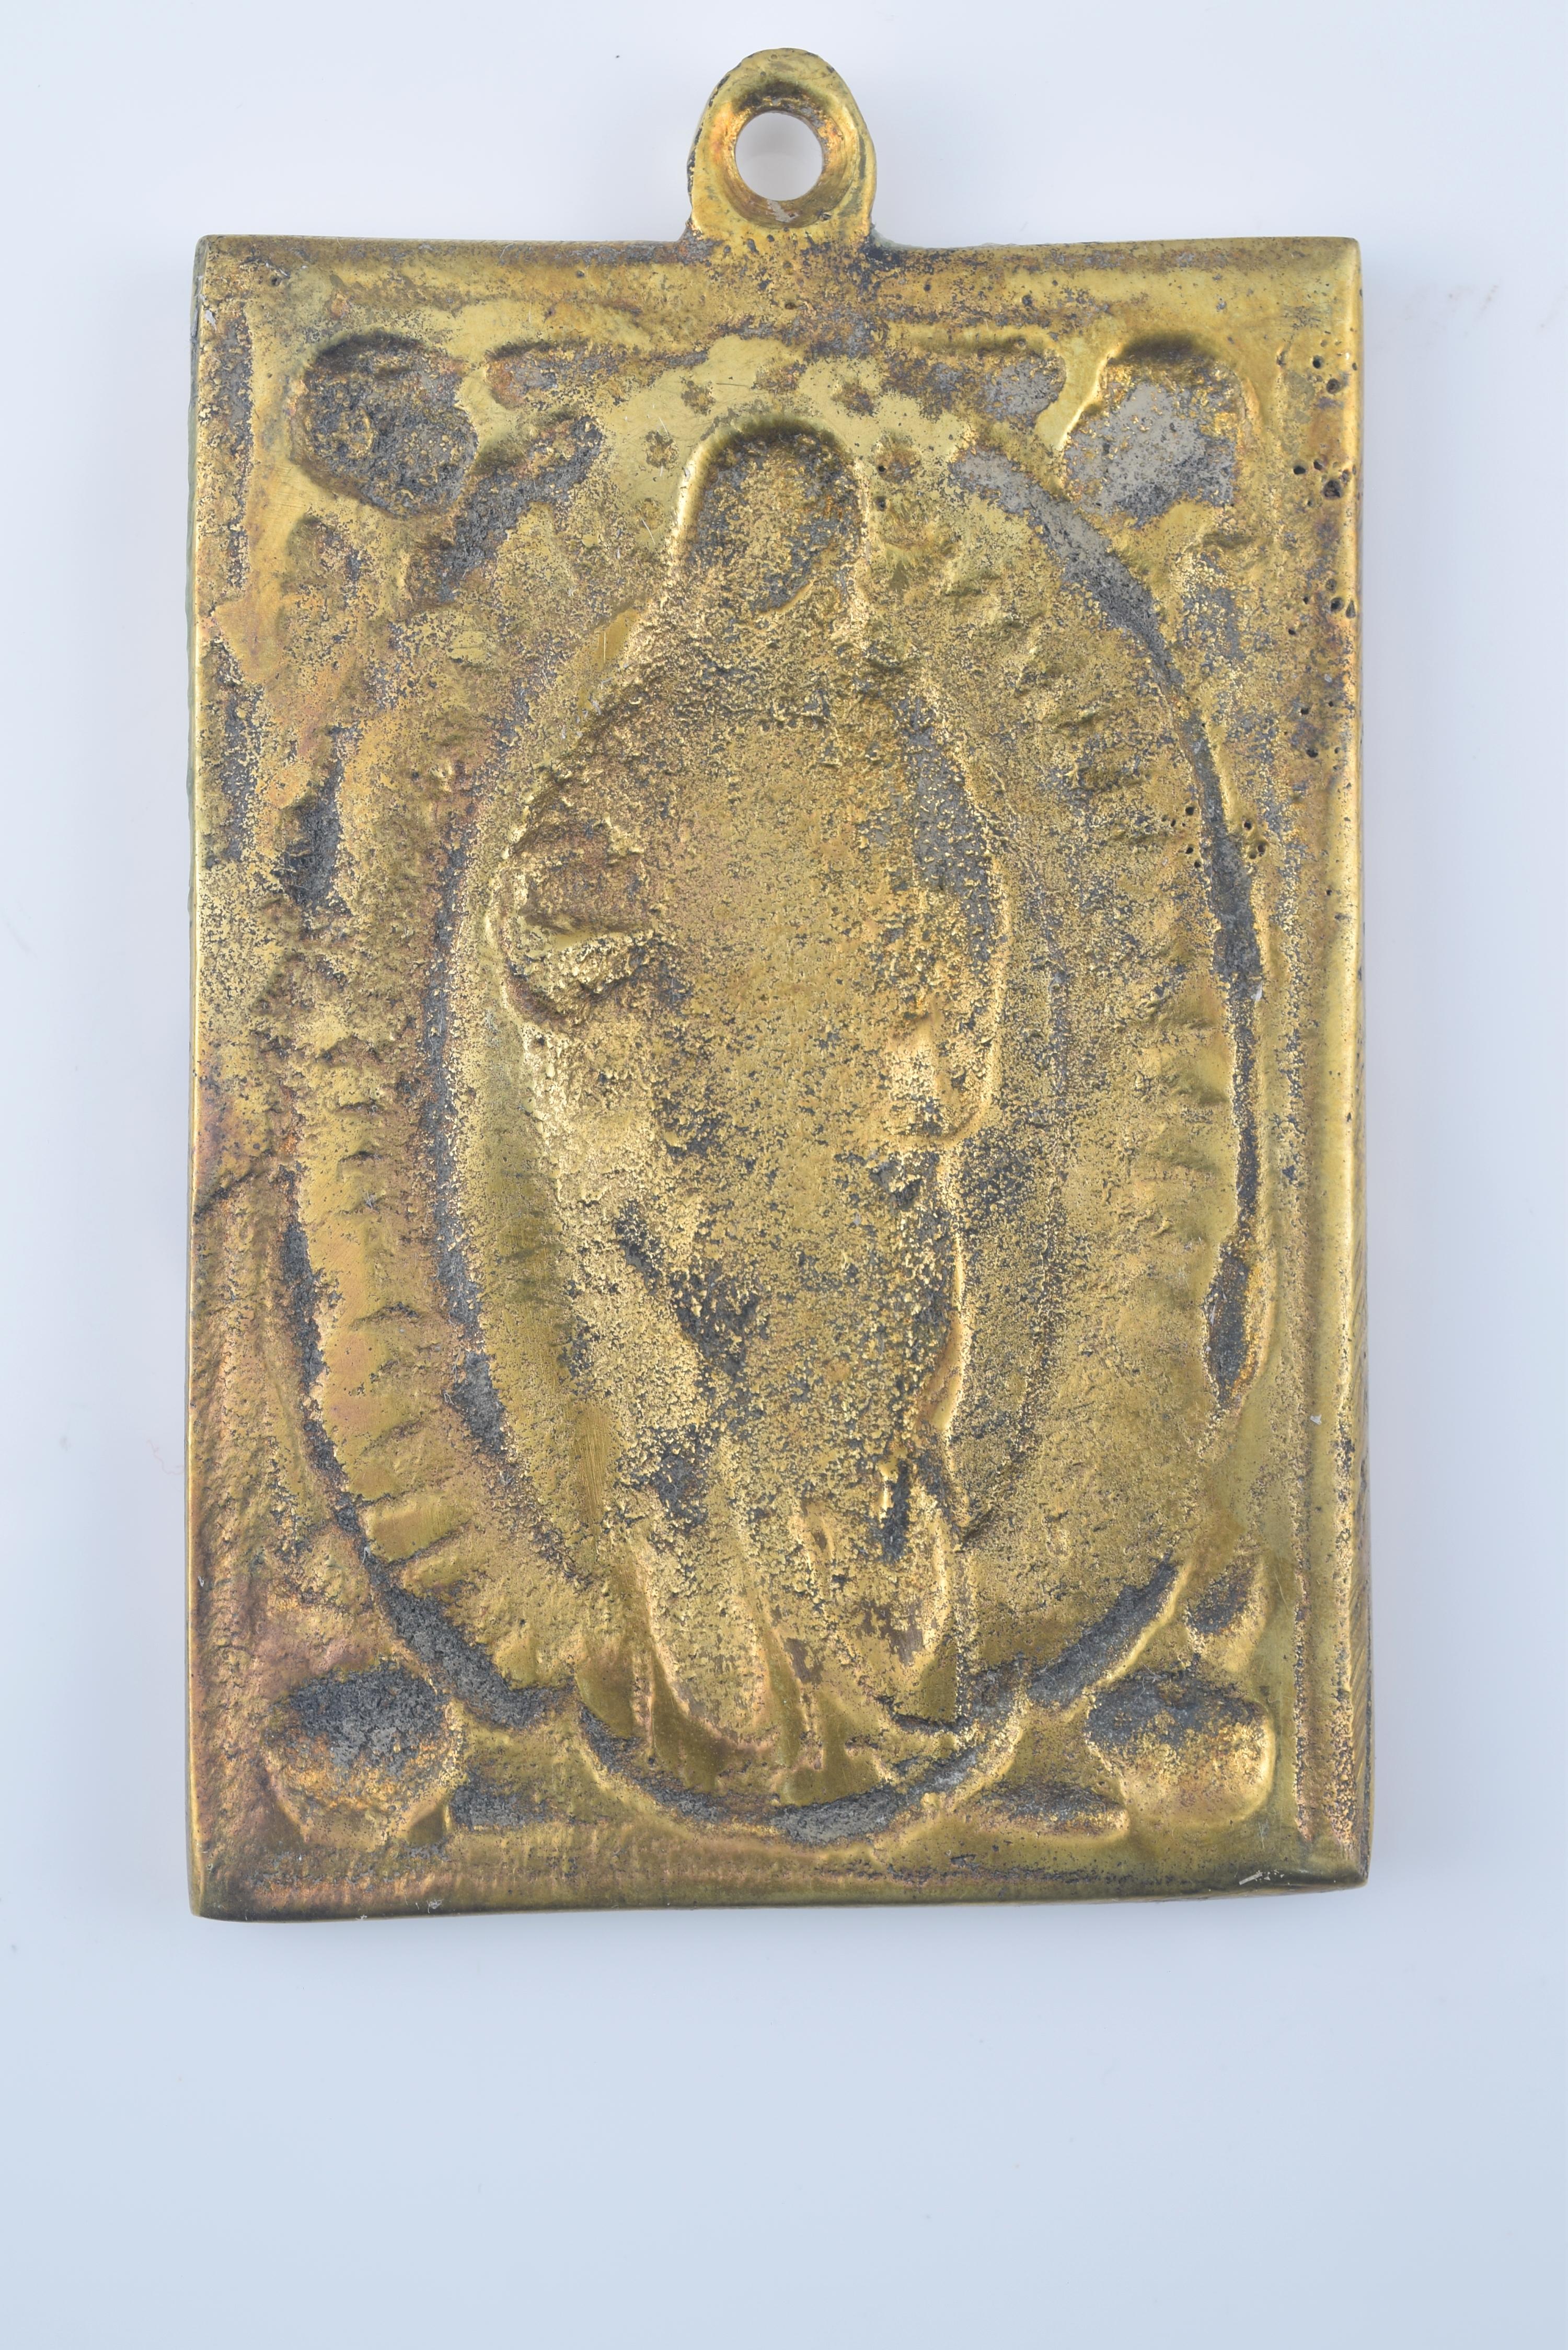 Devotional plaque, Immaculate Conception. Bronze. Spanish school, 19th century. 
Bronze devotional plate with a washer at the top and a rectangular shape that presents a relief on the front. In this you can see the Virgin Mary on a crescent moon,